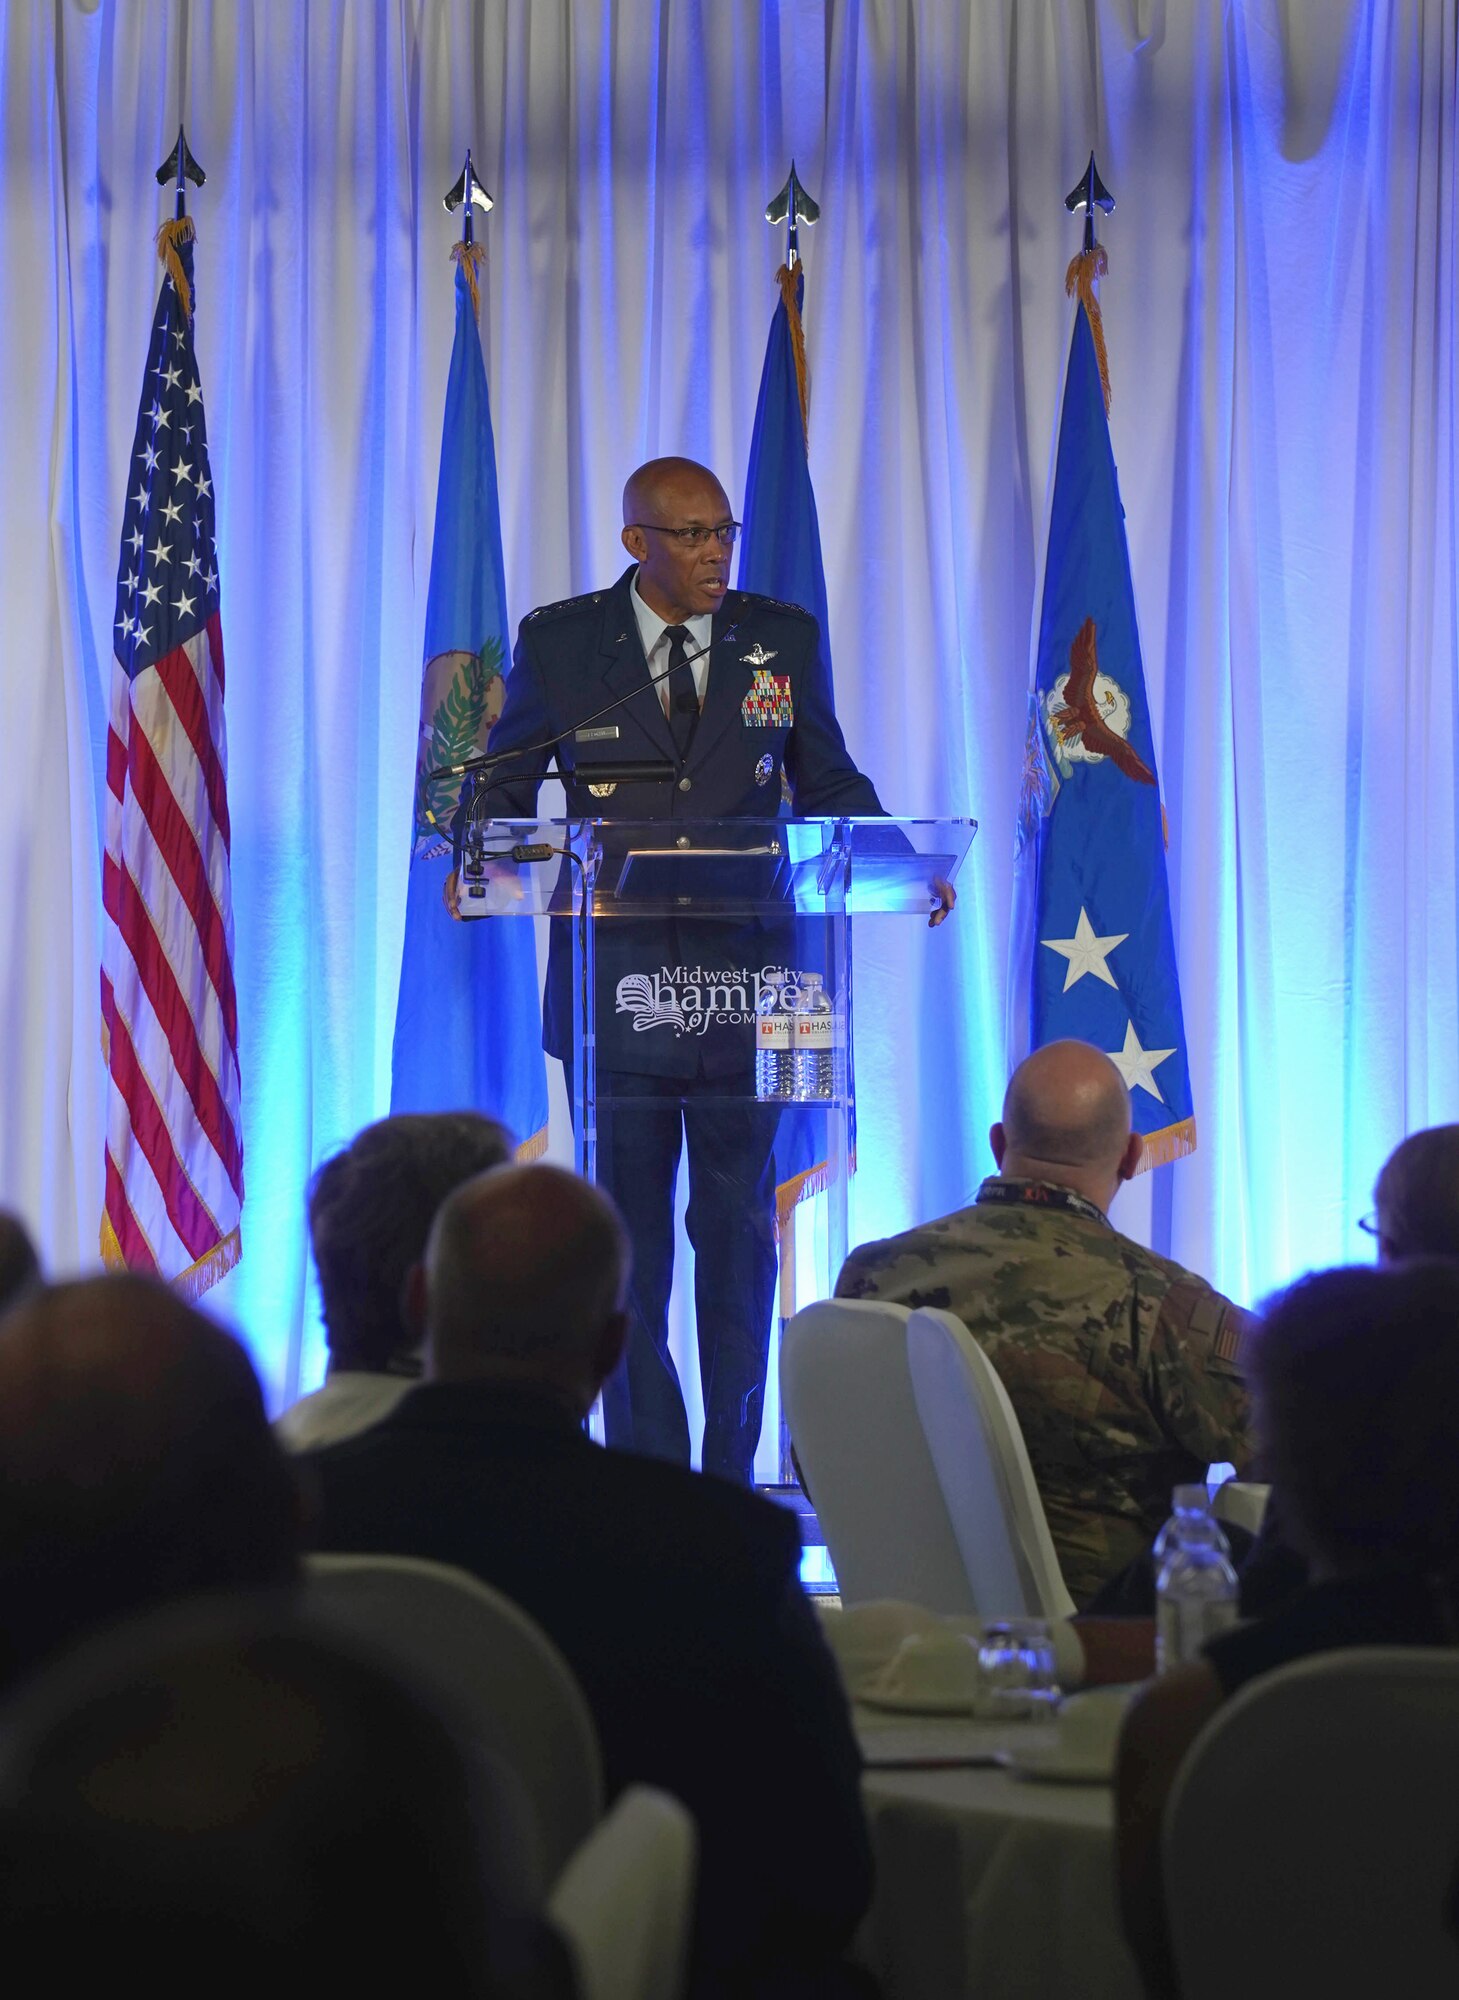 Air Force Chief of Staff Gen. CQ Brown, Jr. speaks to an audience of aerospace and defense business leaders and contractors to kick off the 15th annual Tinker and the Primes at the Reed Center in Midwest City, Okla., Aug. 10, 2021. The three-day event brought together Department of Defense officials and industry partners to interact and share knowledge.